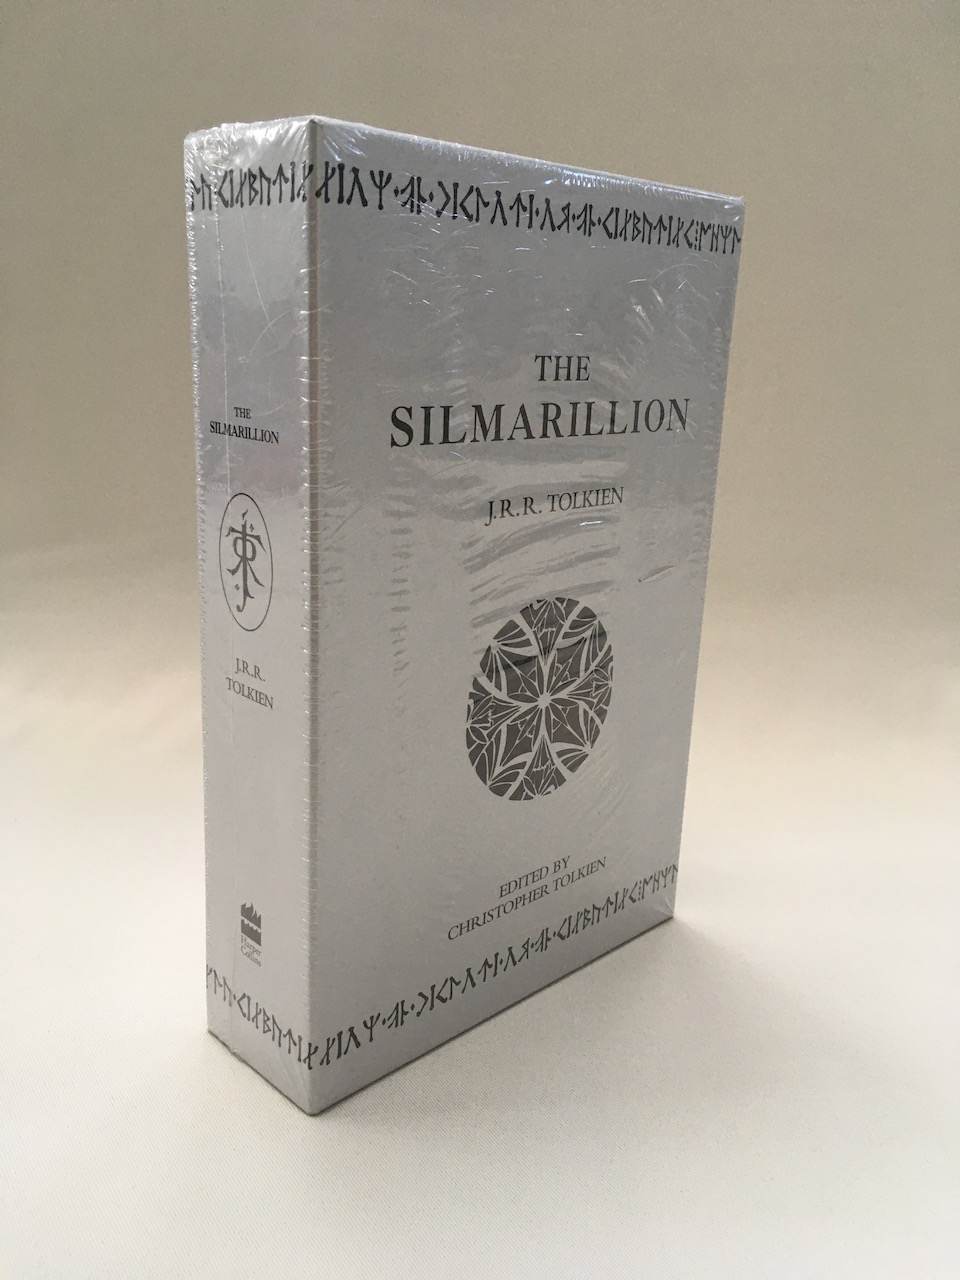 Published by Harper Collins in 1999 this gift set holds a hardcover edition of The Silmarillion, map of Beleriand, booklet with background to The Silmarillion, poster and cd with Christopher Tolkien reading Beren and Luthien